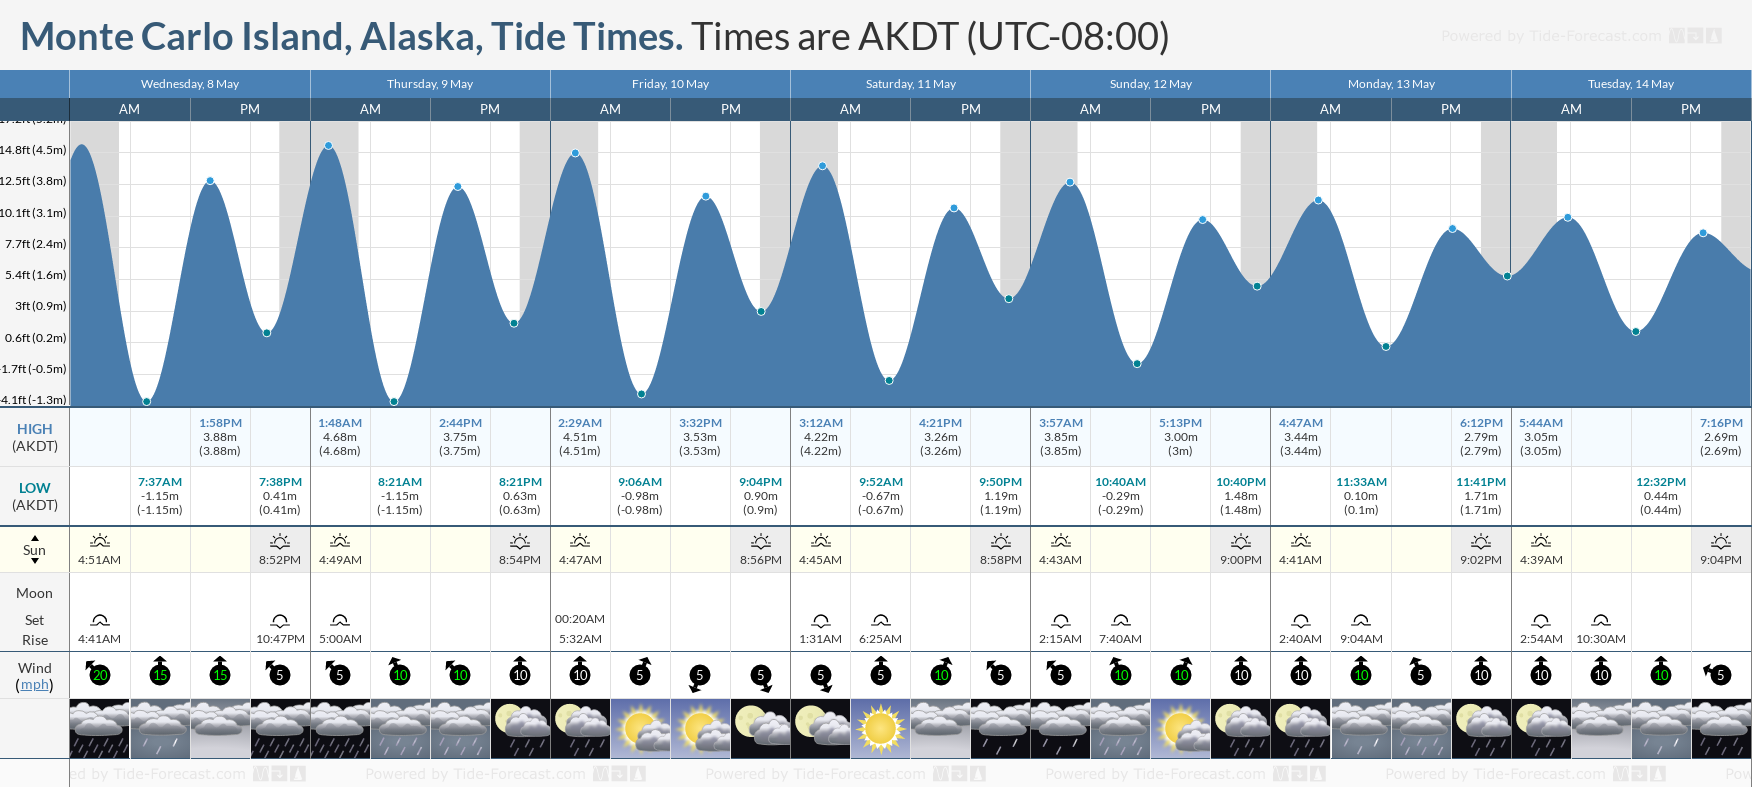 Monte Carlo Island, Alaska Tide Chart including high and low tide tide times for the next 7 days